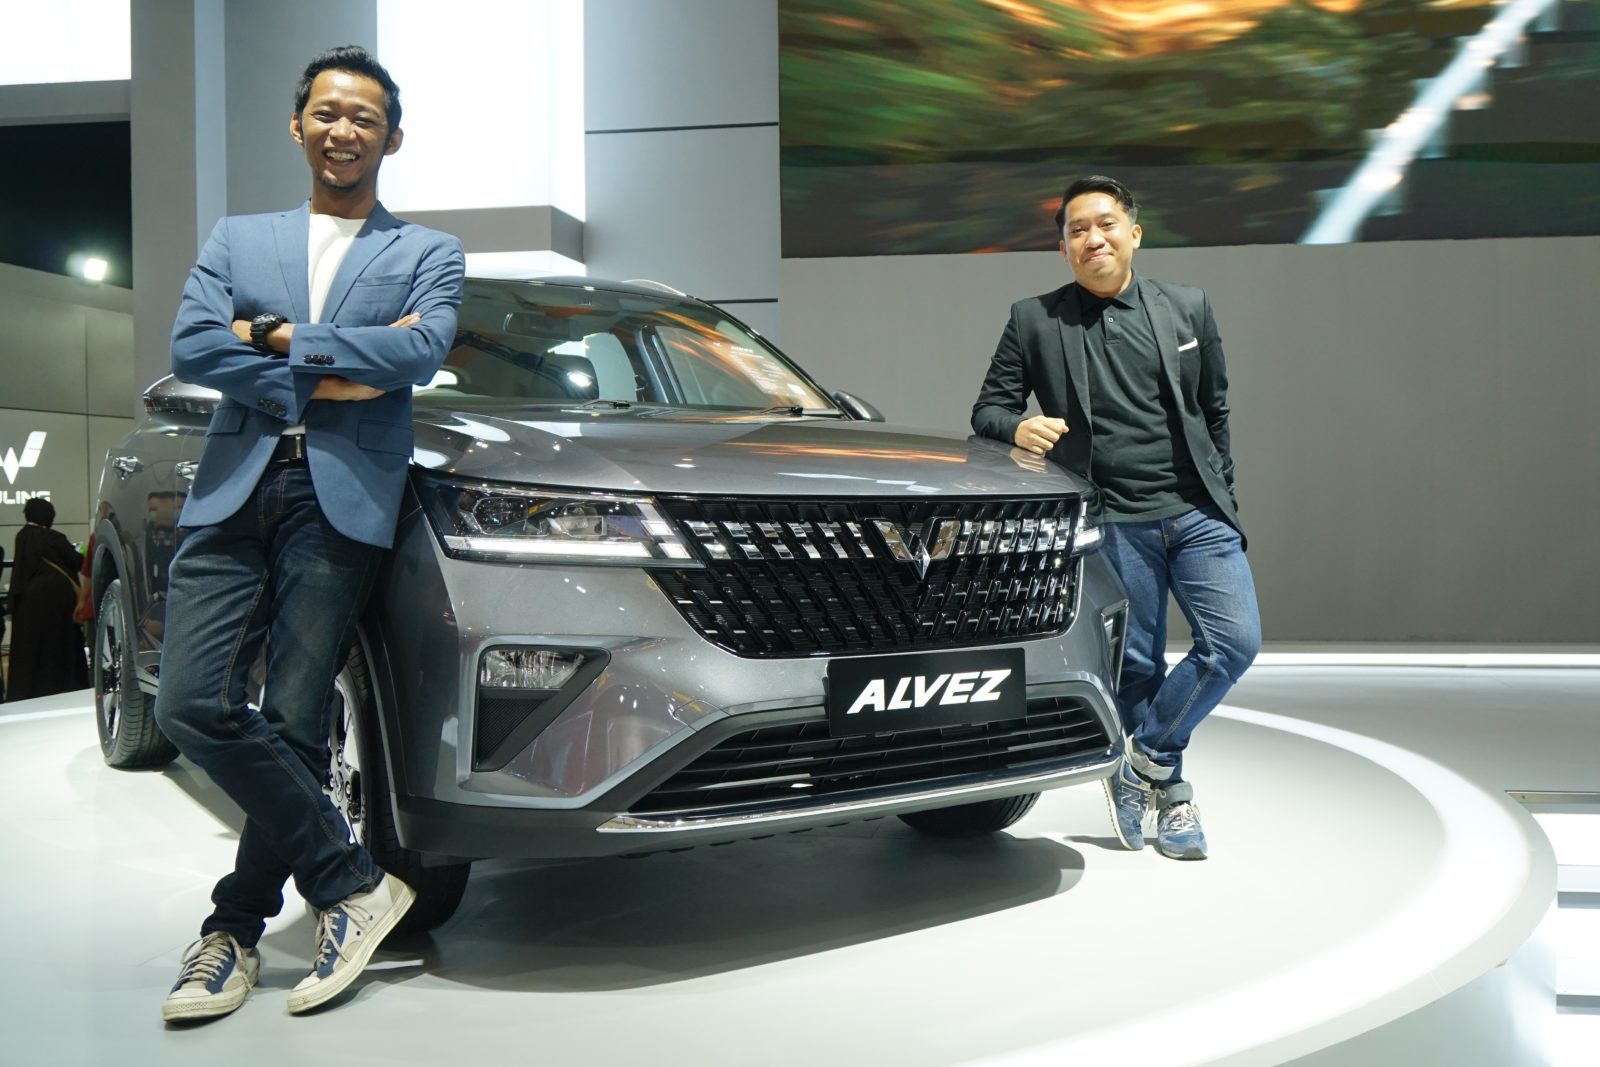 Image Wuling Alvez Combines Stylish Design Language With Complete Features